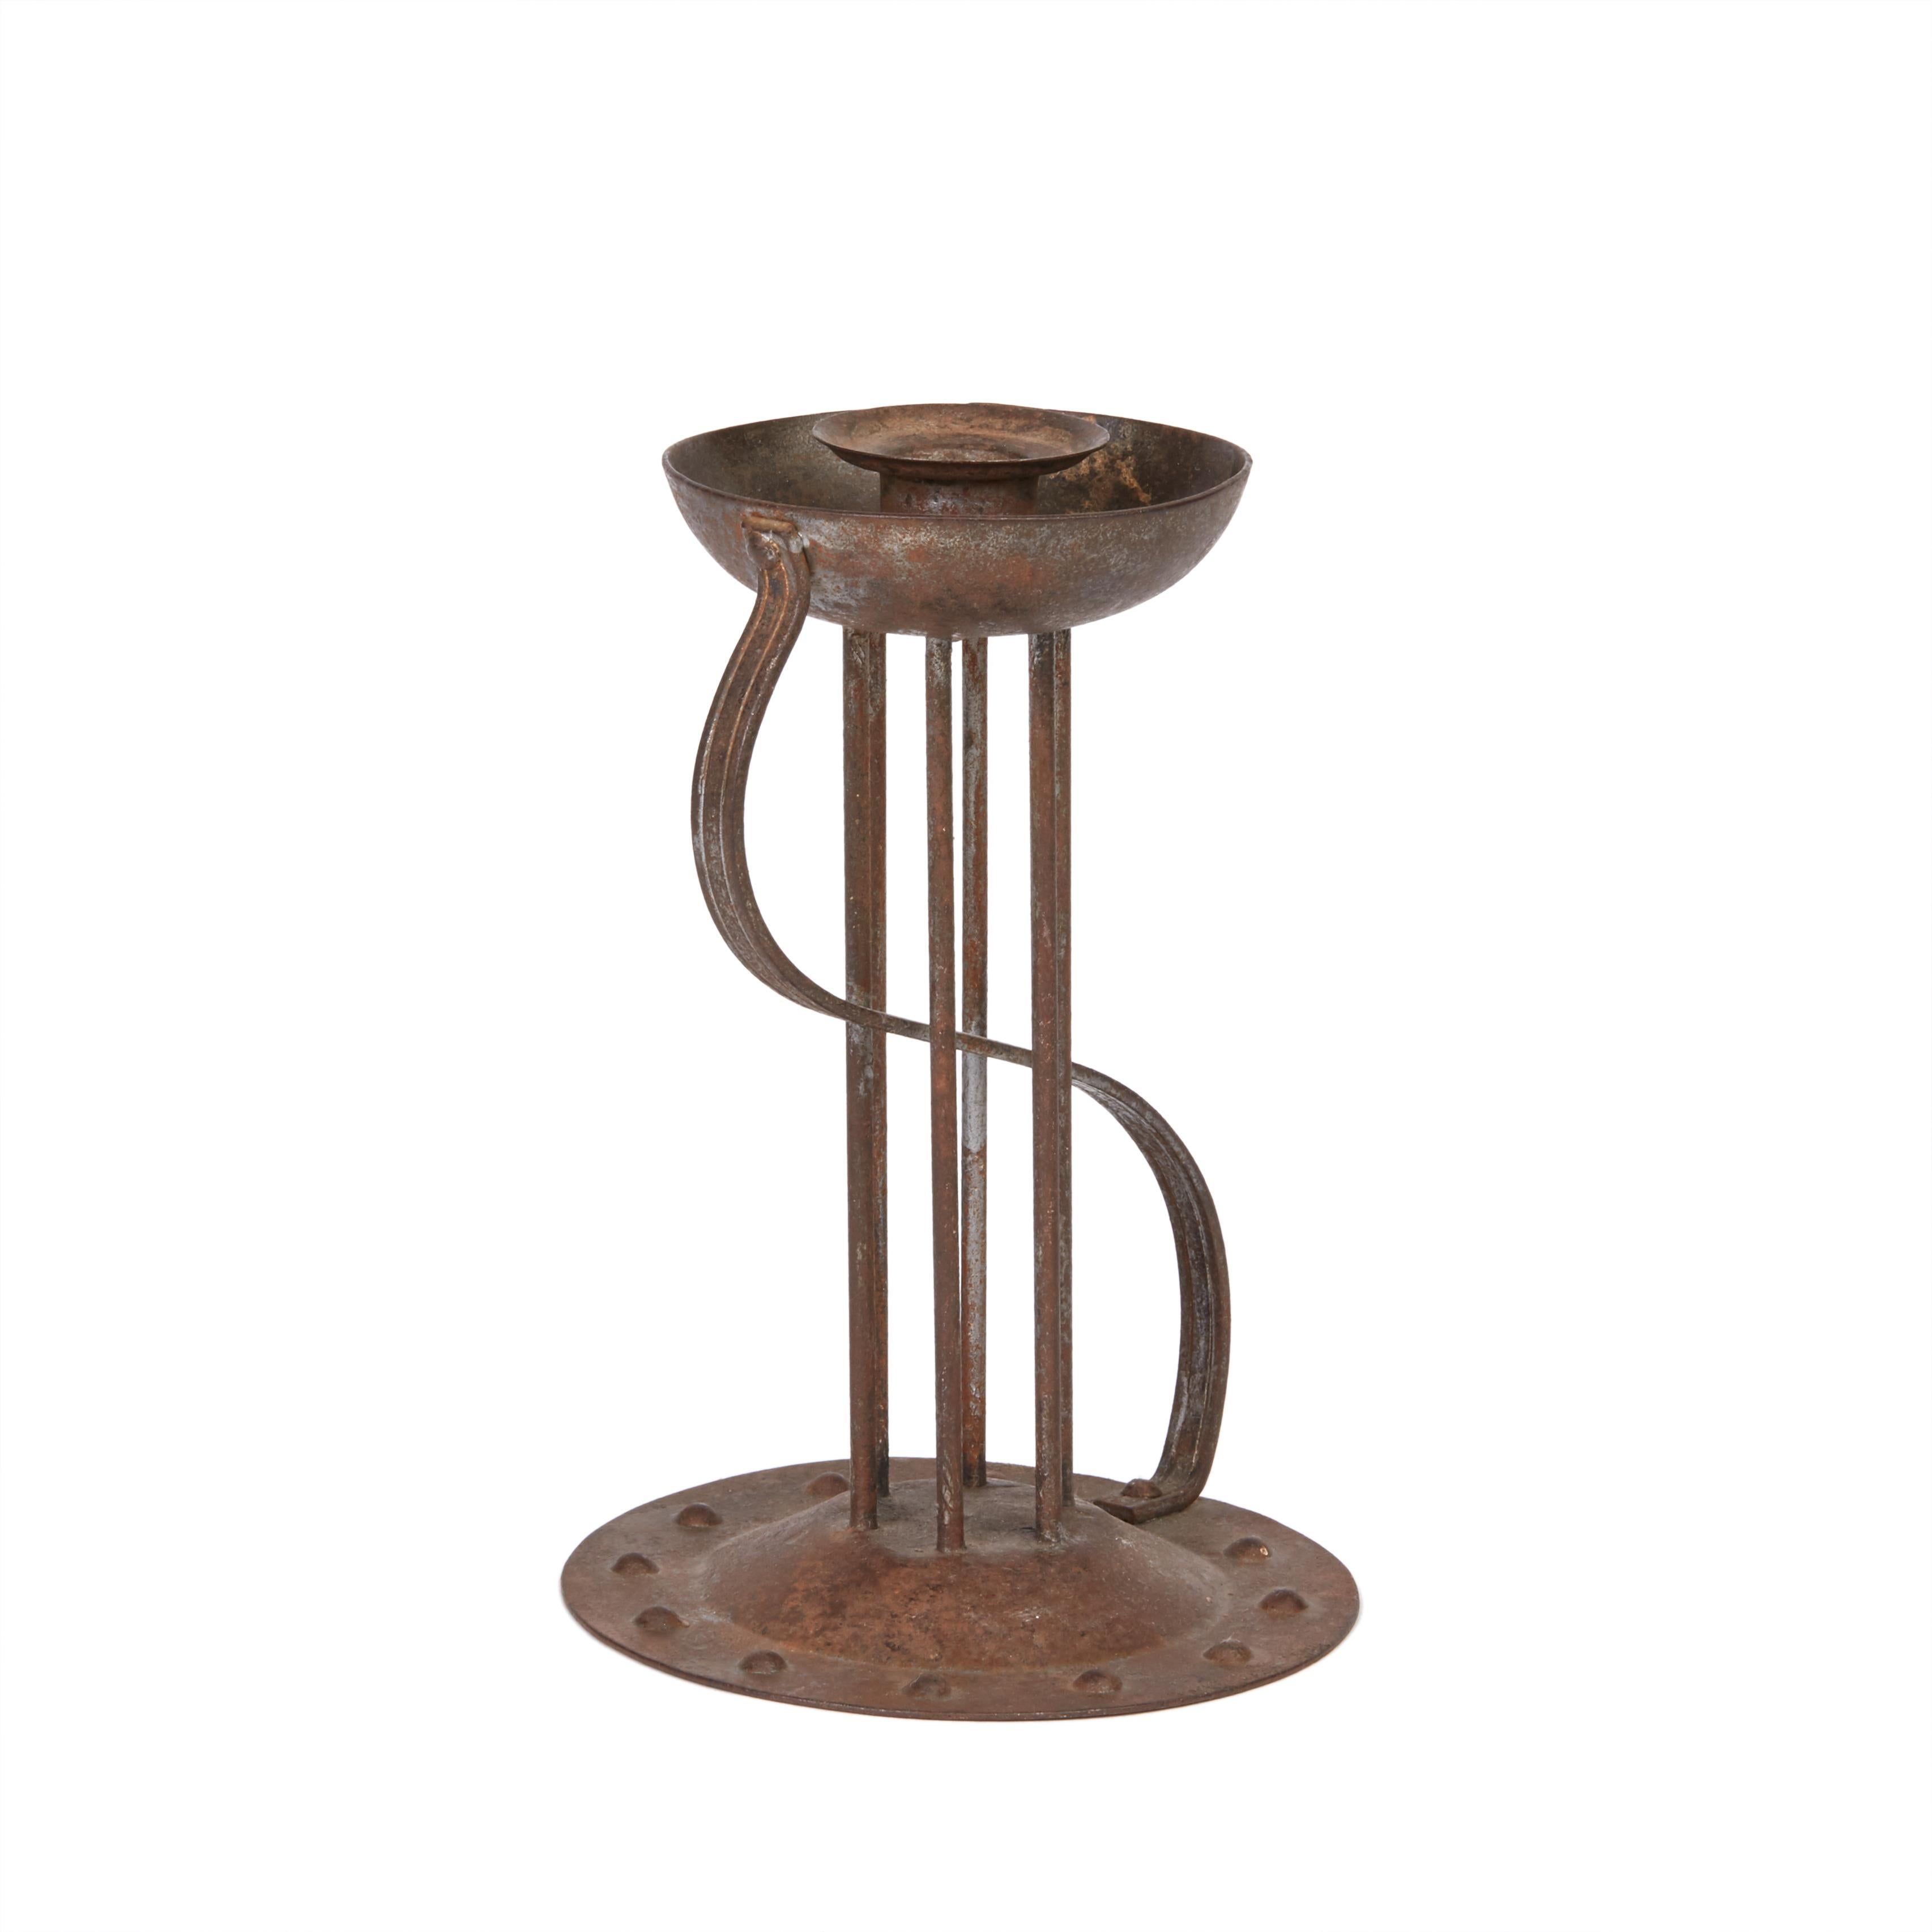 Early 20th Century Viennese Secessionist Hugo Berger Industrial Art Iron Candlestick, circa 1900